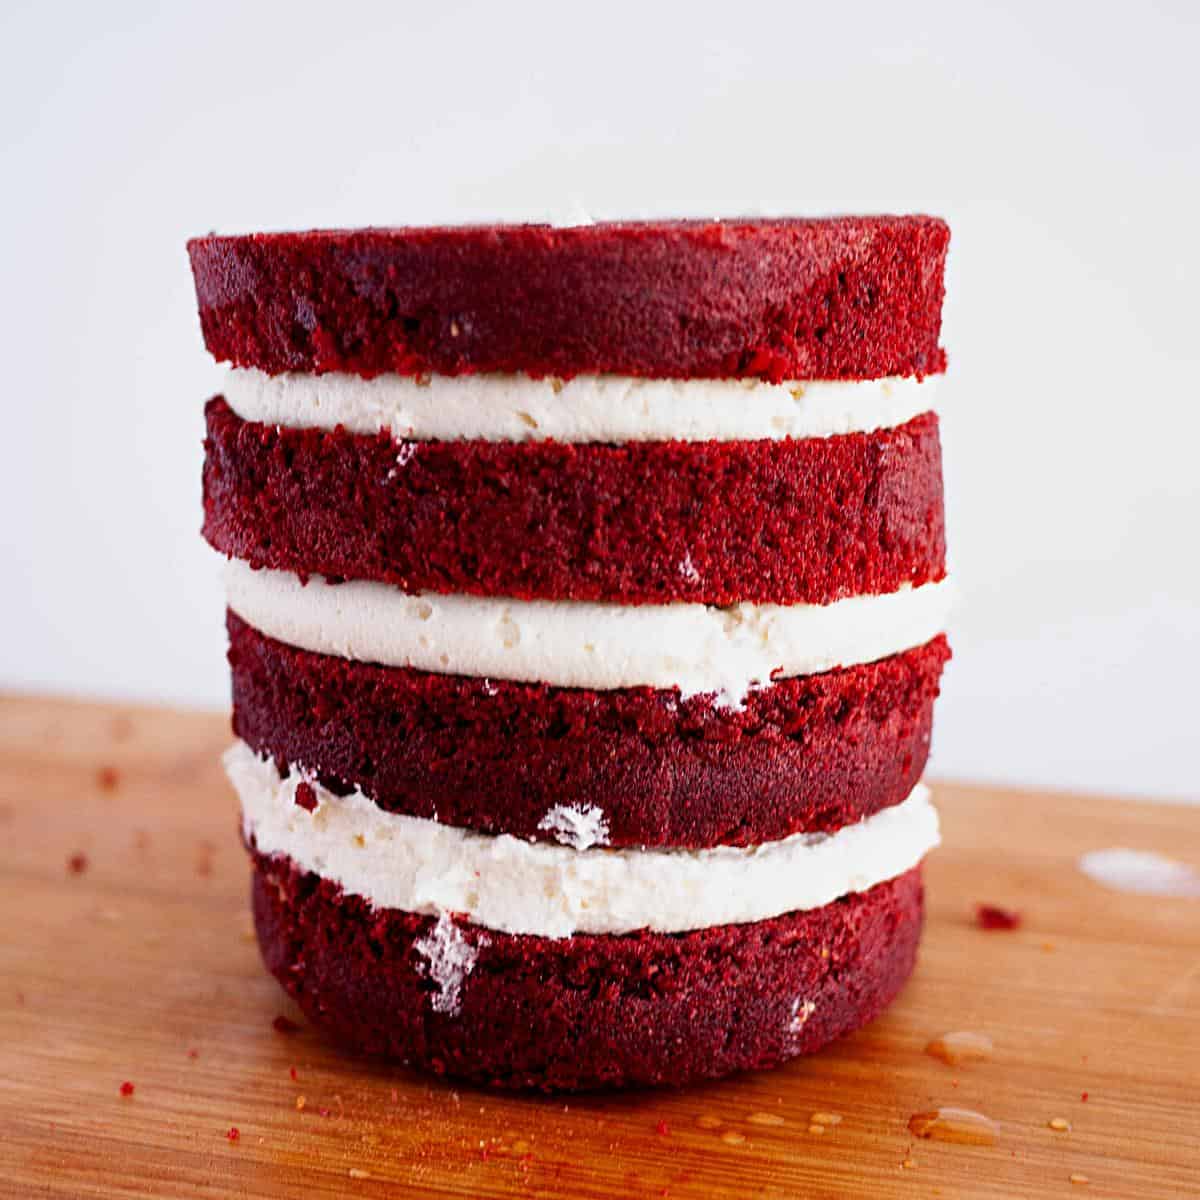 Four layers of frosted red velvet cake.